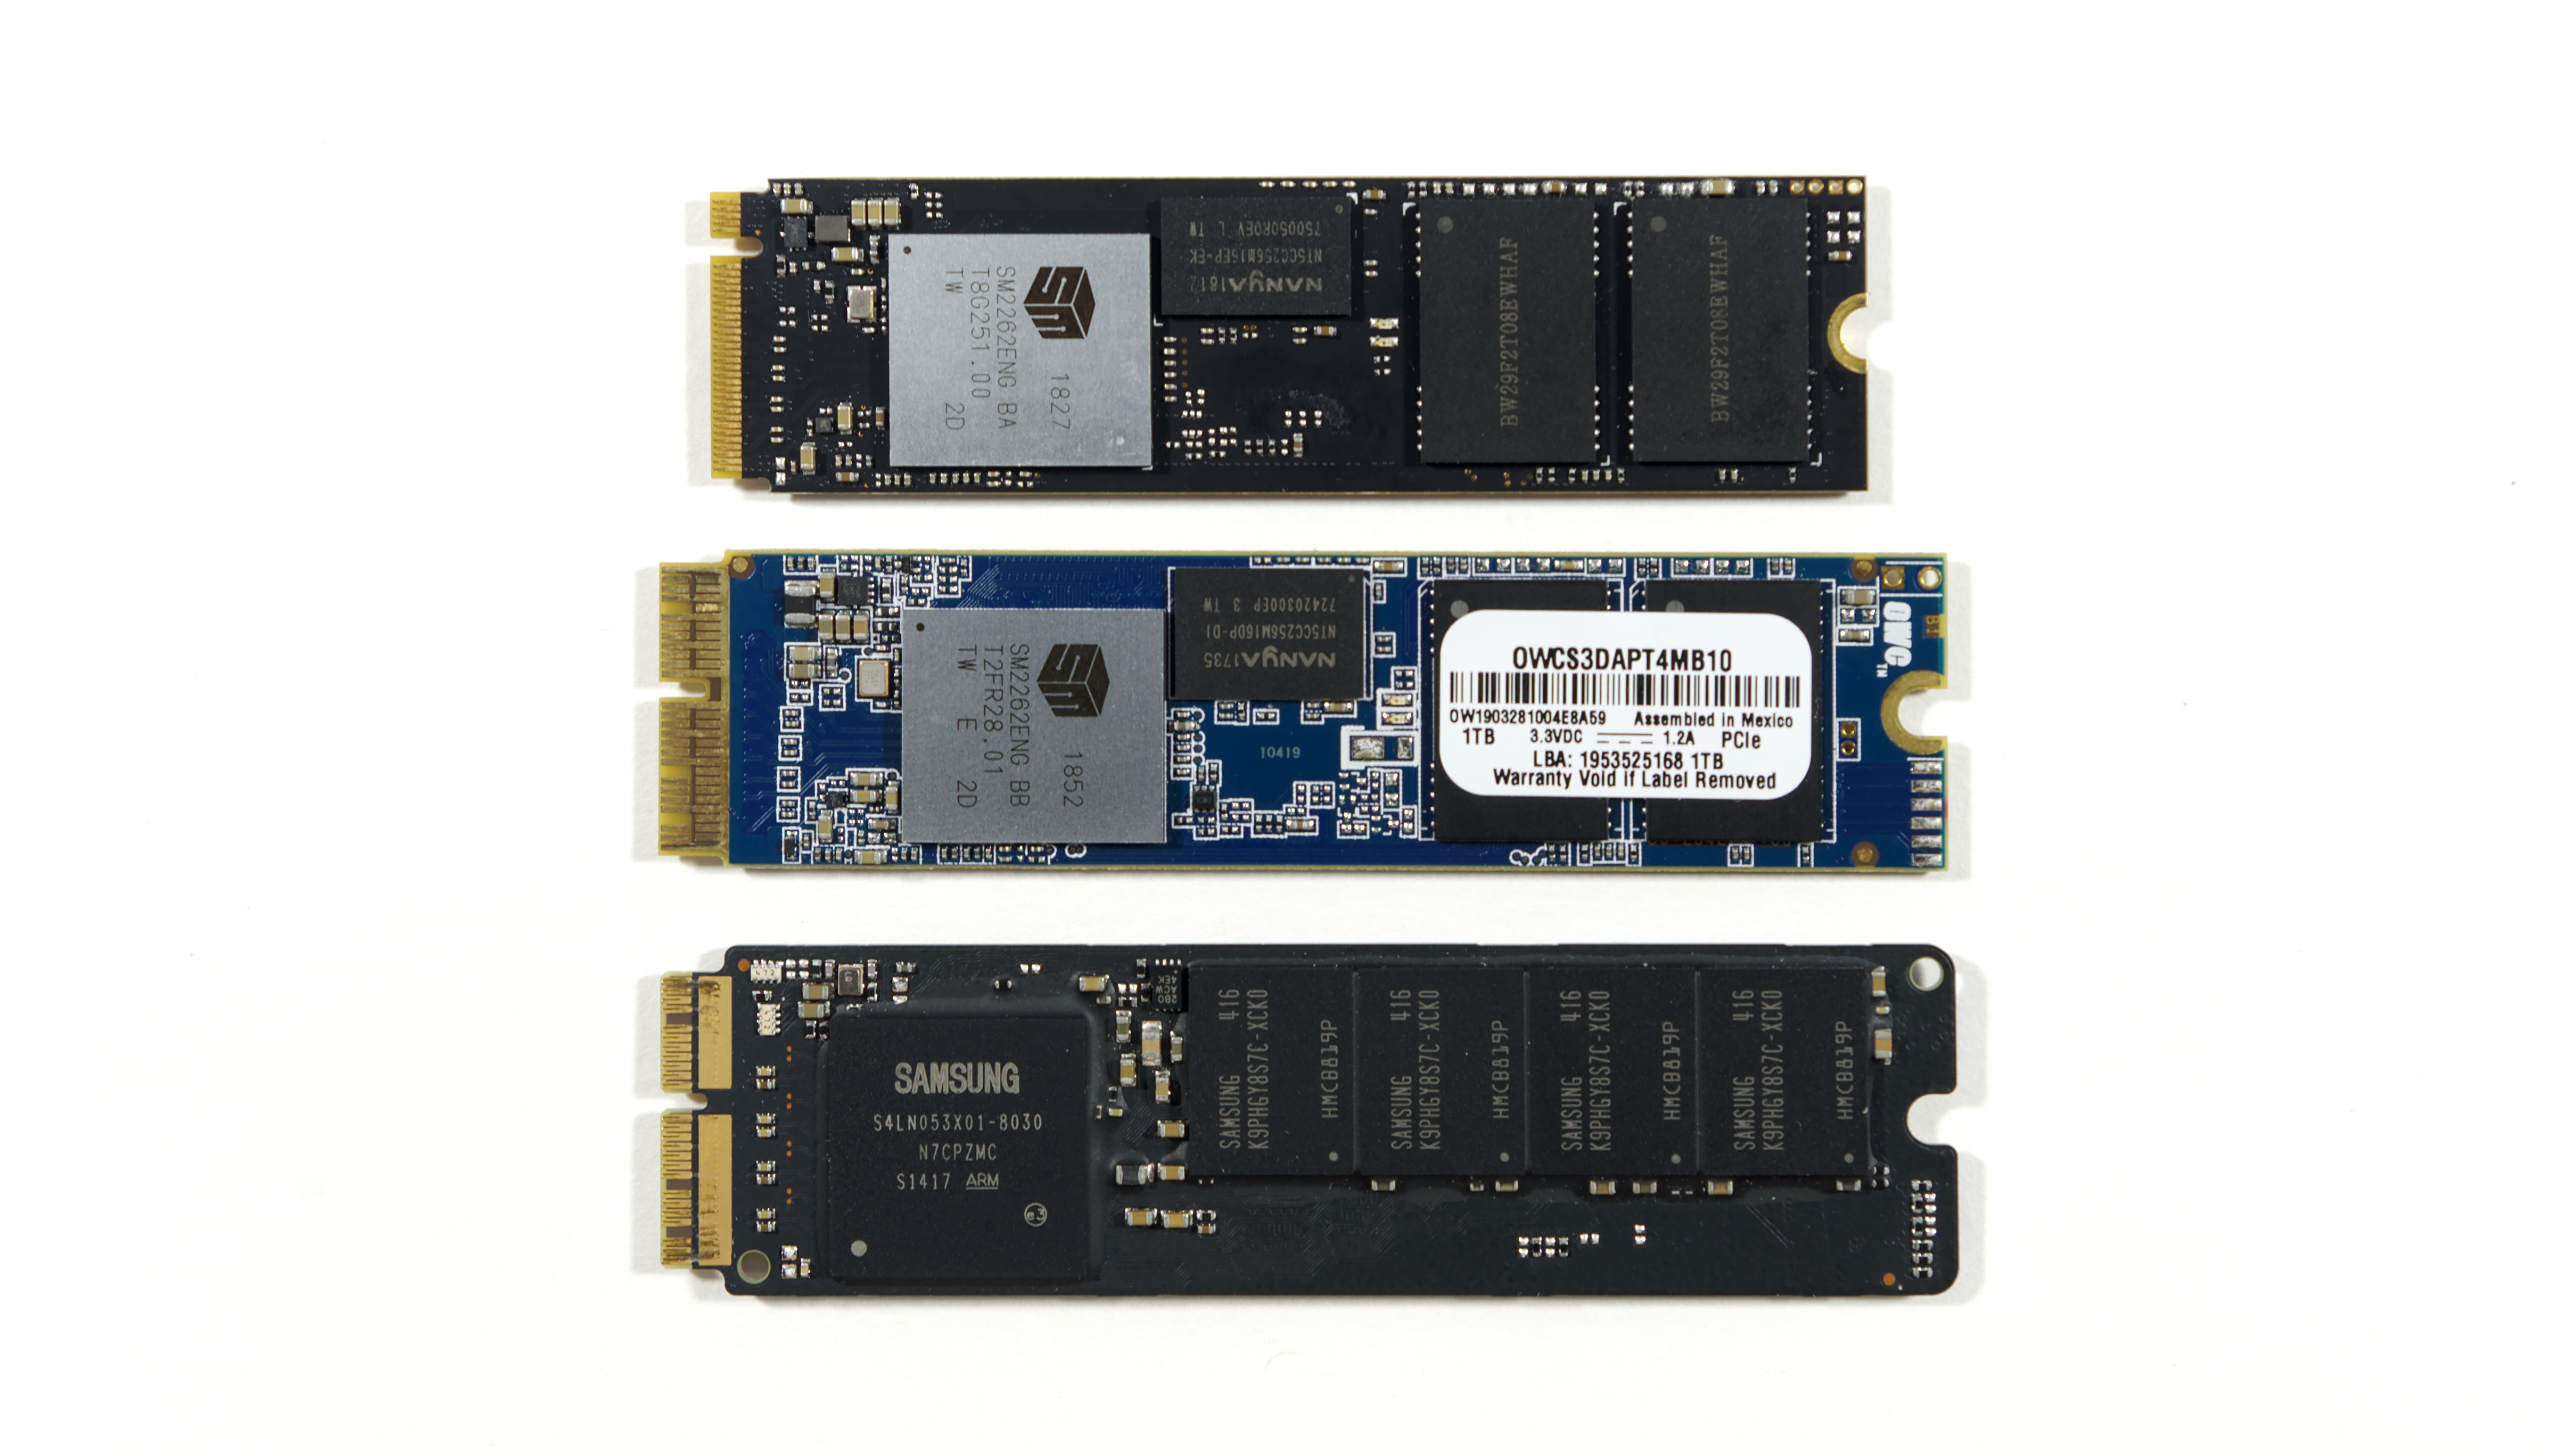 Conclusion - The OWC Aura Pro X2 SSD Review: An NVMe Upgrade For